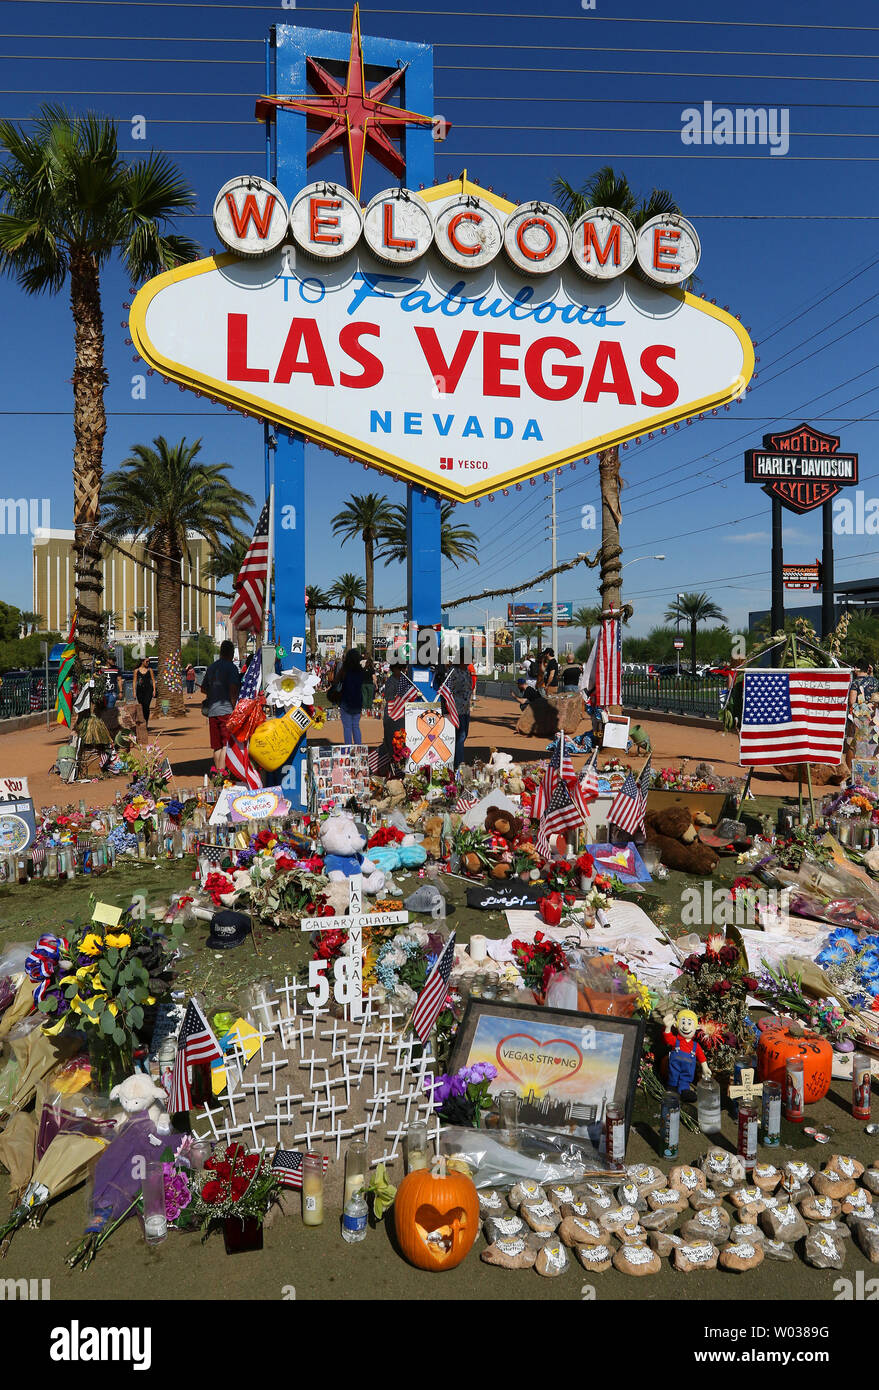 A memorial for the slain victims of the Route 91 Harvest music festival mass is shown next to the historic Welcome to Las Vegas sign October 19, 2017, in Las